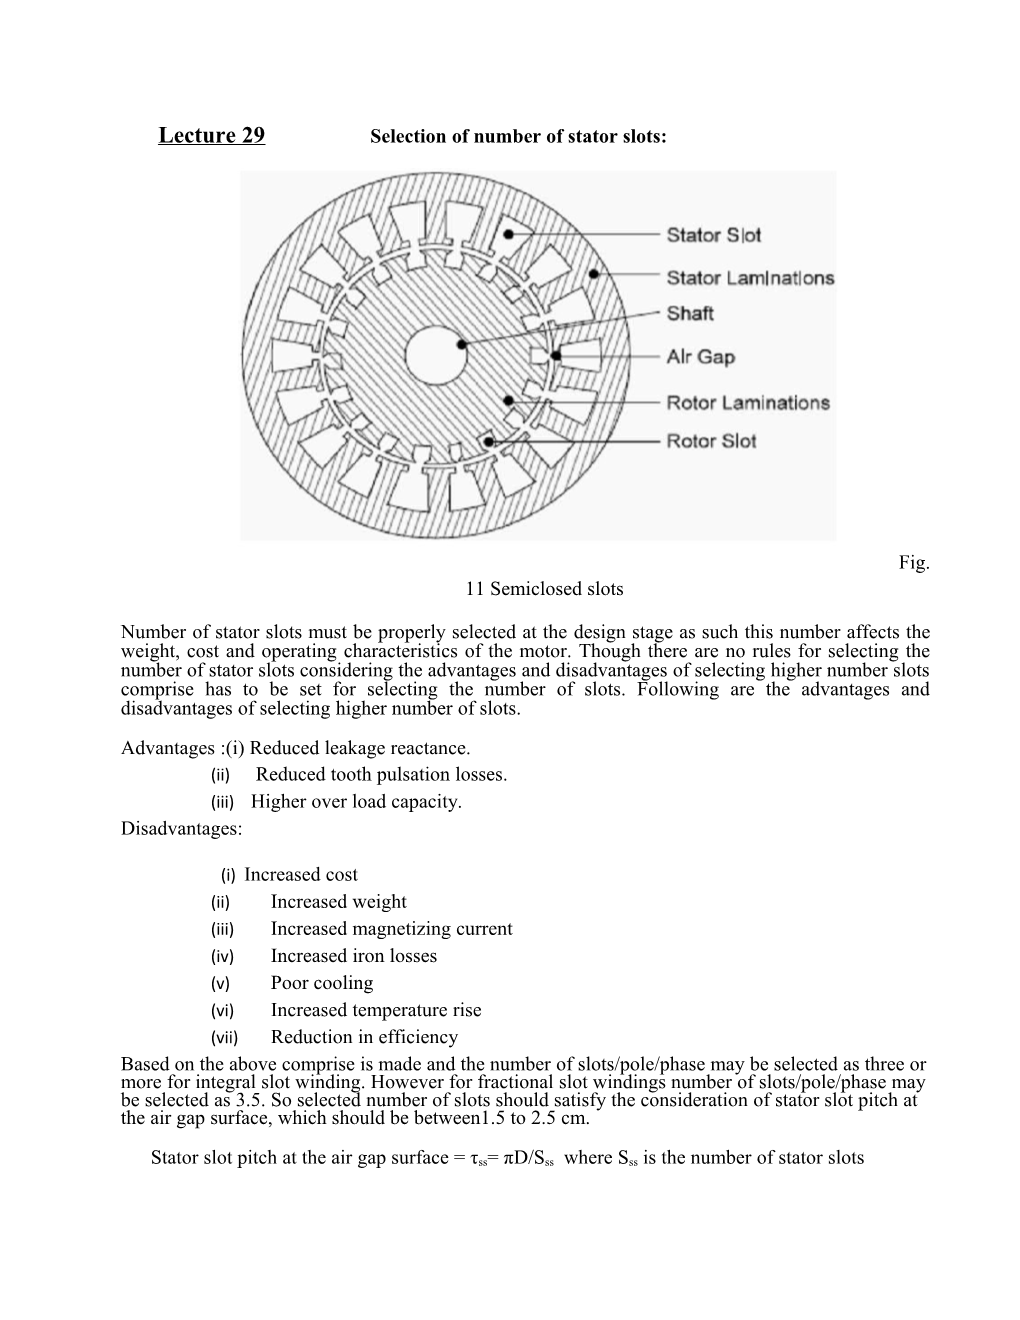 Lecture 29 Selection of Number of Stator Slots